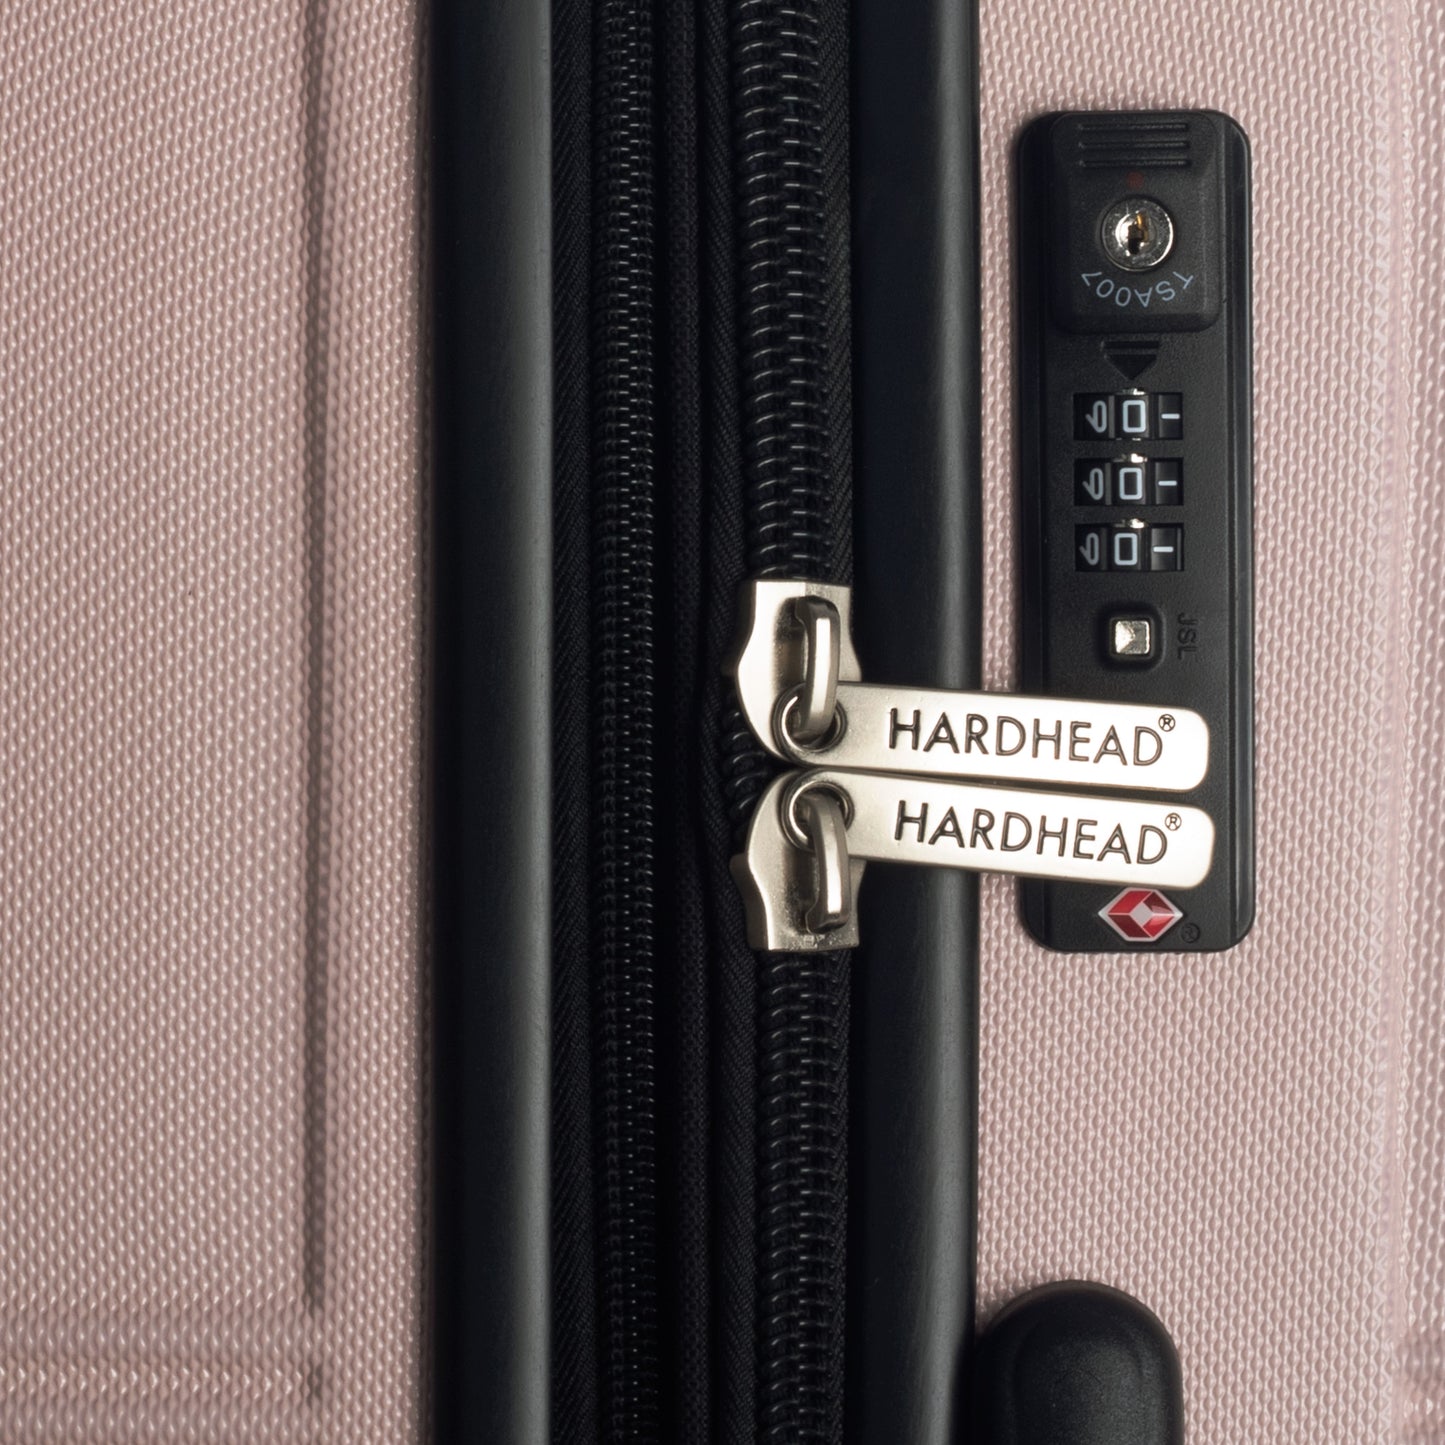 Hardhead 3 Pieces Set Luggage (22/26/30") Suitcase Lock Spinner Hardshell Recovery Collection Pink